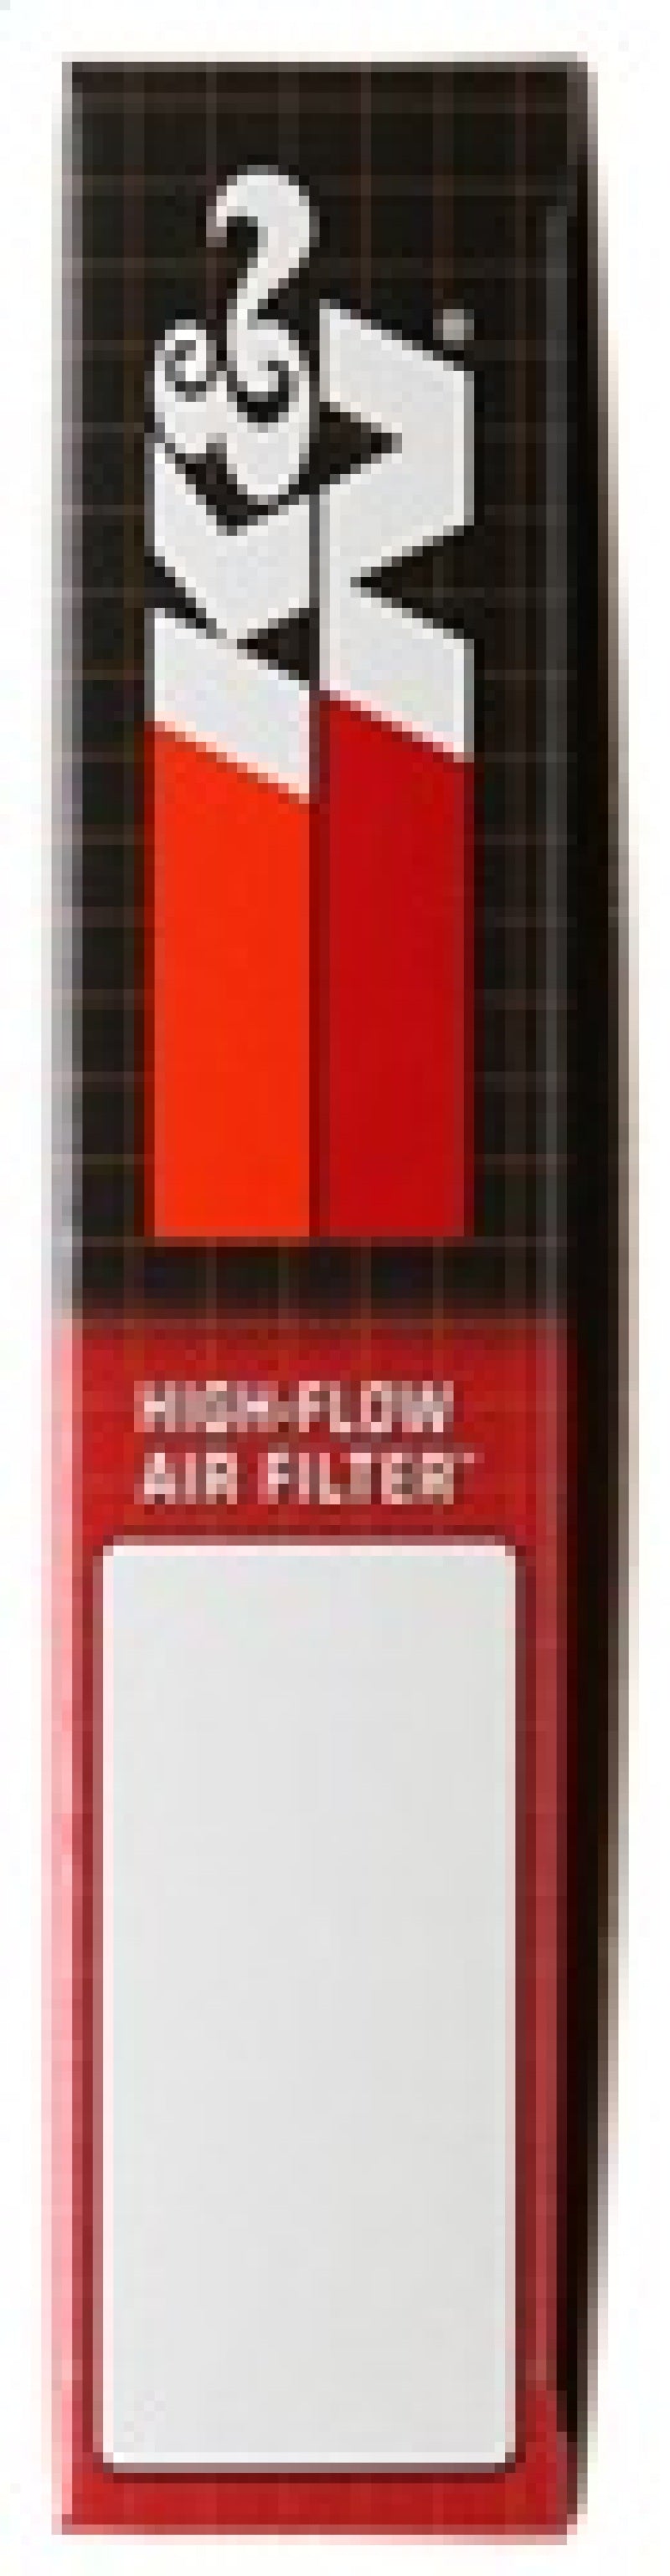 K&N Replacement Air Filter for 12 Fiat 500 1.4L L4